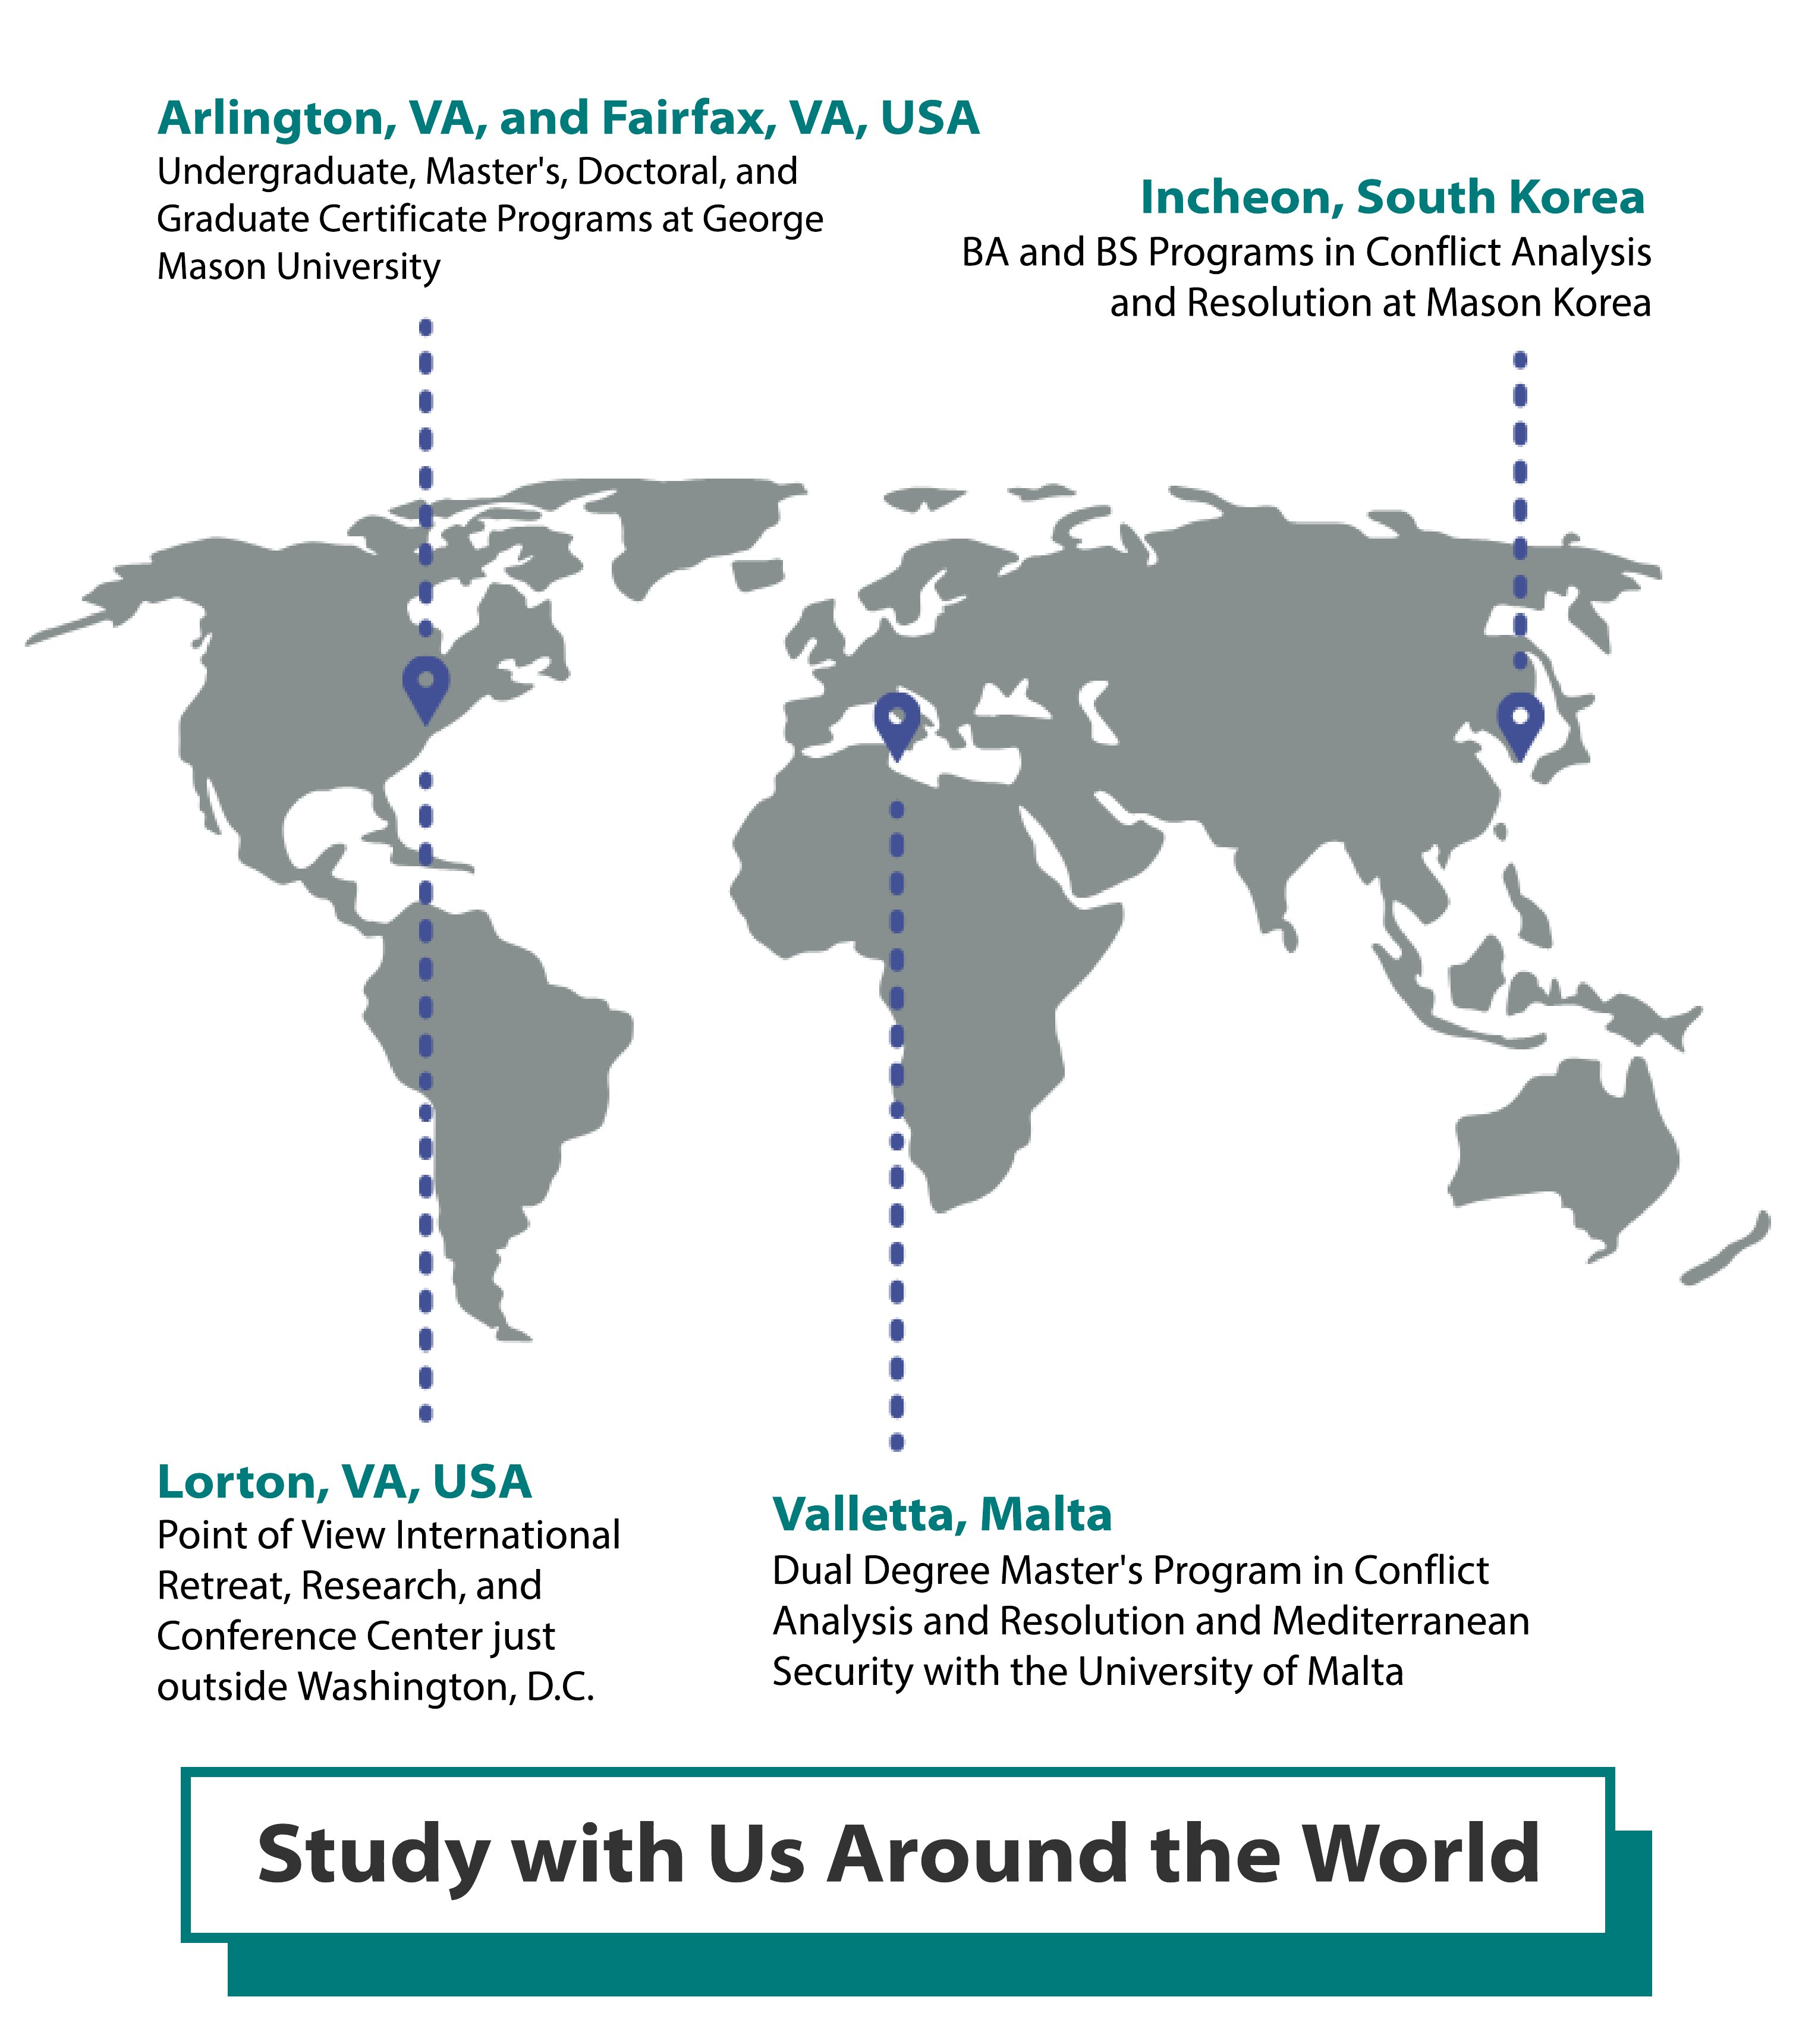 Graphic of a map with points showing the Carter School's campuses. The Carter School has its bachelor's program in Fairfax, Virginia, as well as in Incheon, South Korea, its graduate programs in Arlington, Virginia, and a dual master's degree with the University of Malta in Valetta, Malta. In addition, it has its Point of View Retreat and Research Center in Lornton, Virginia.